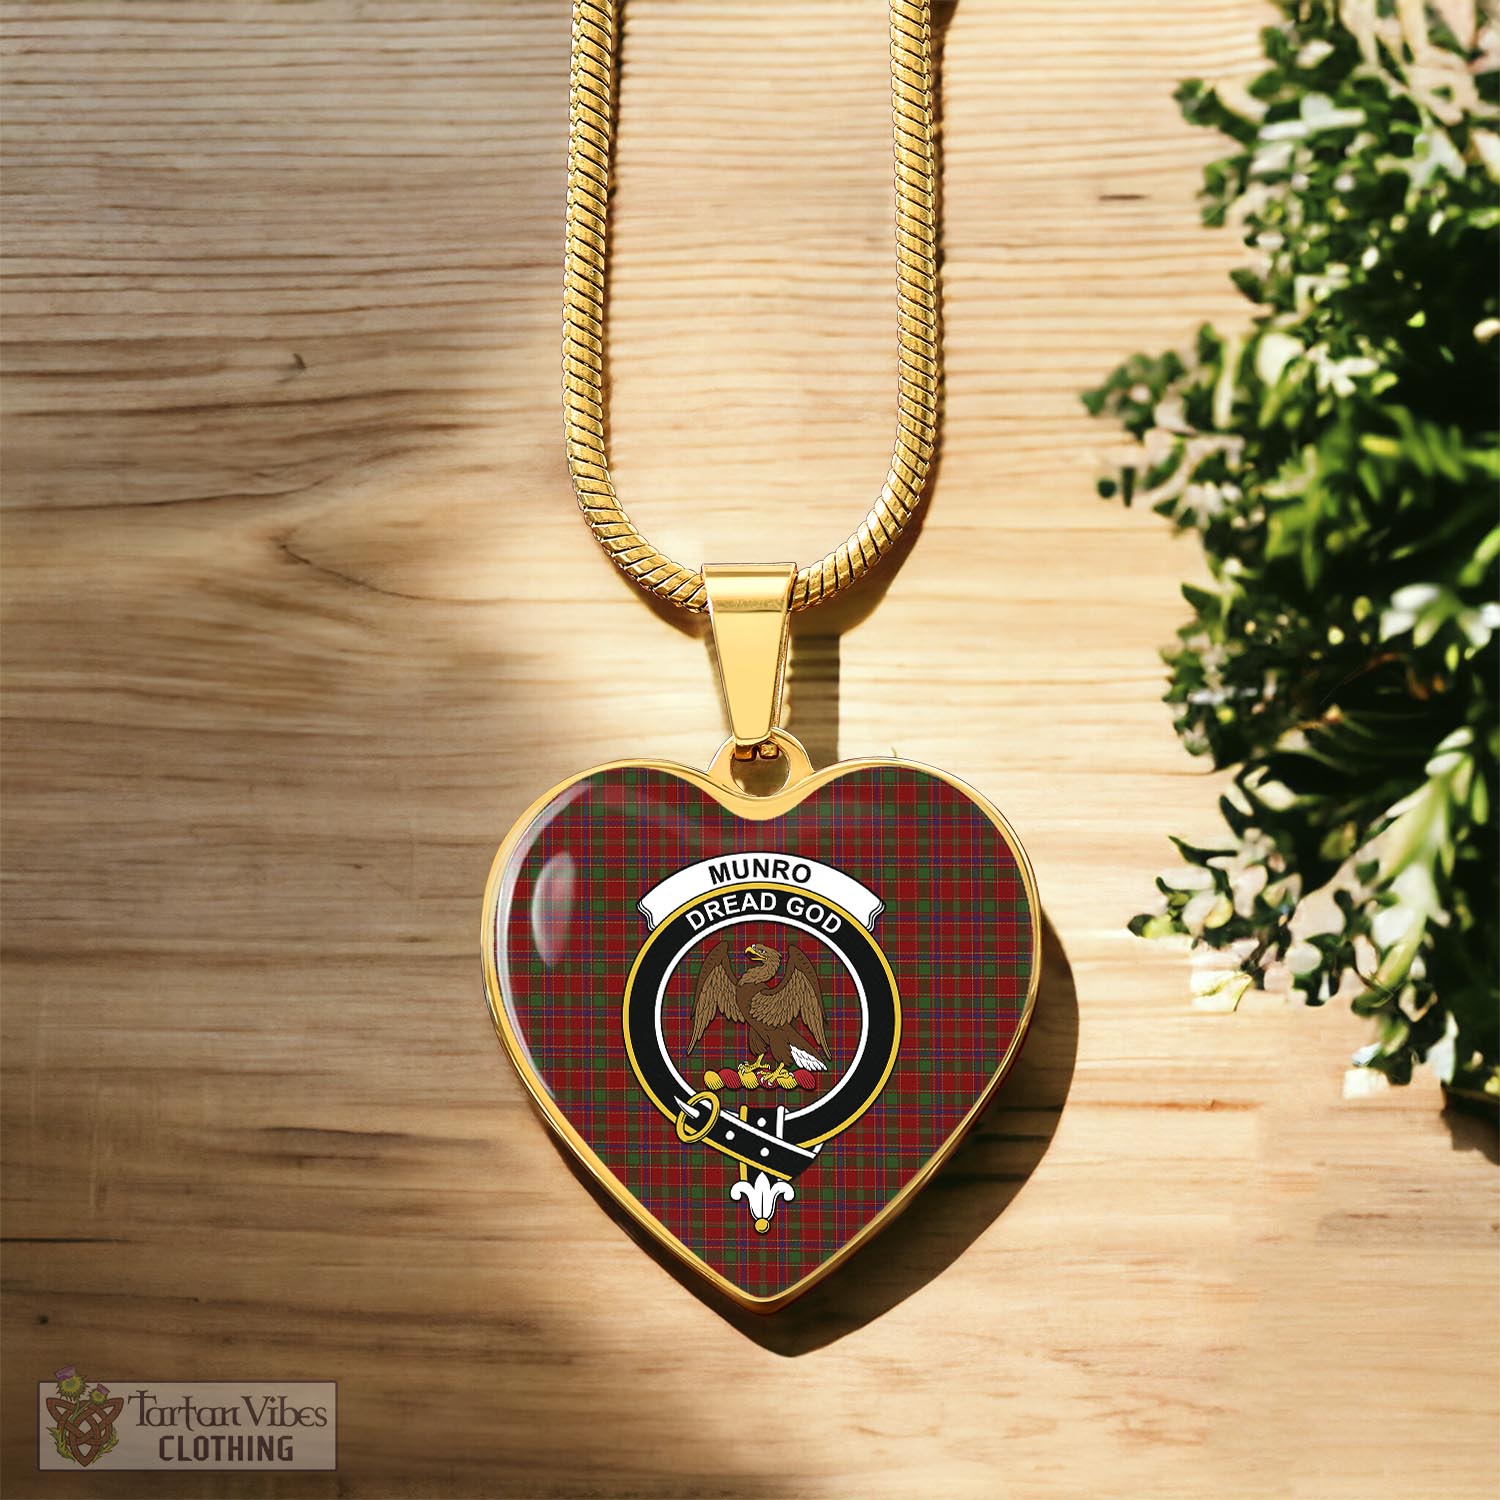 Tartan Vibes Clothing Munro Tartan Heart Necklace with Family Crest